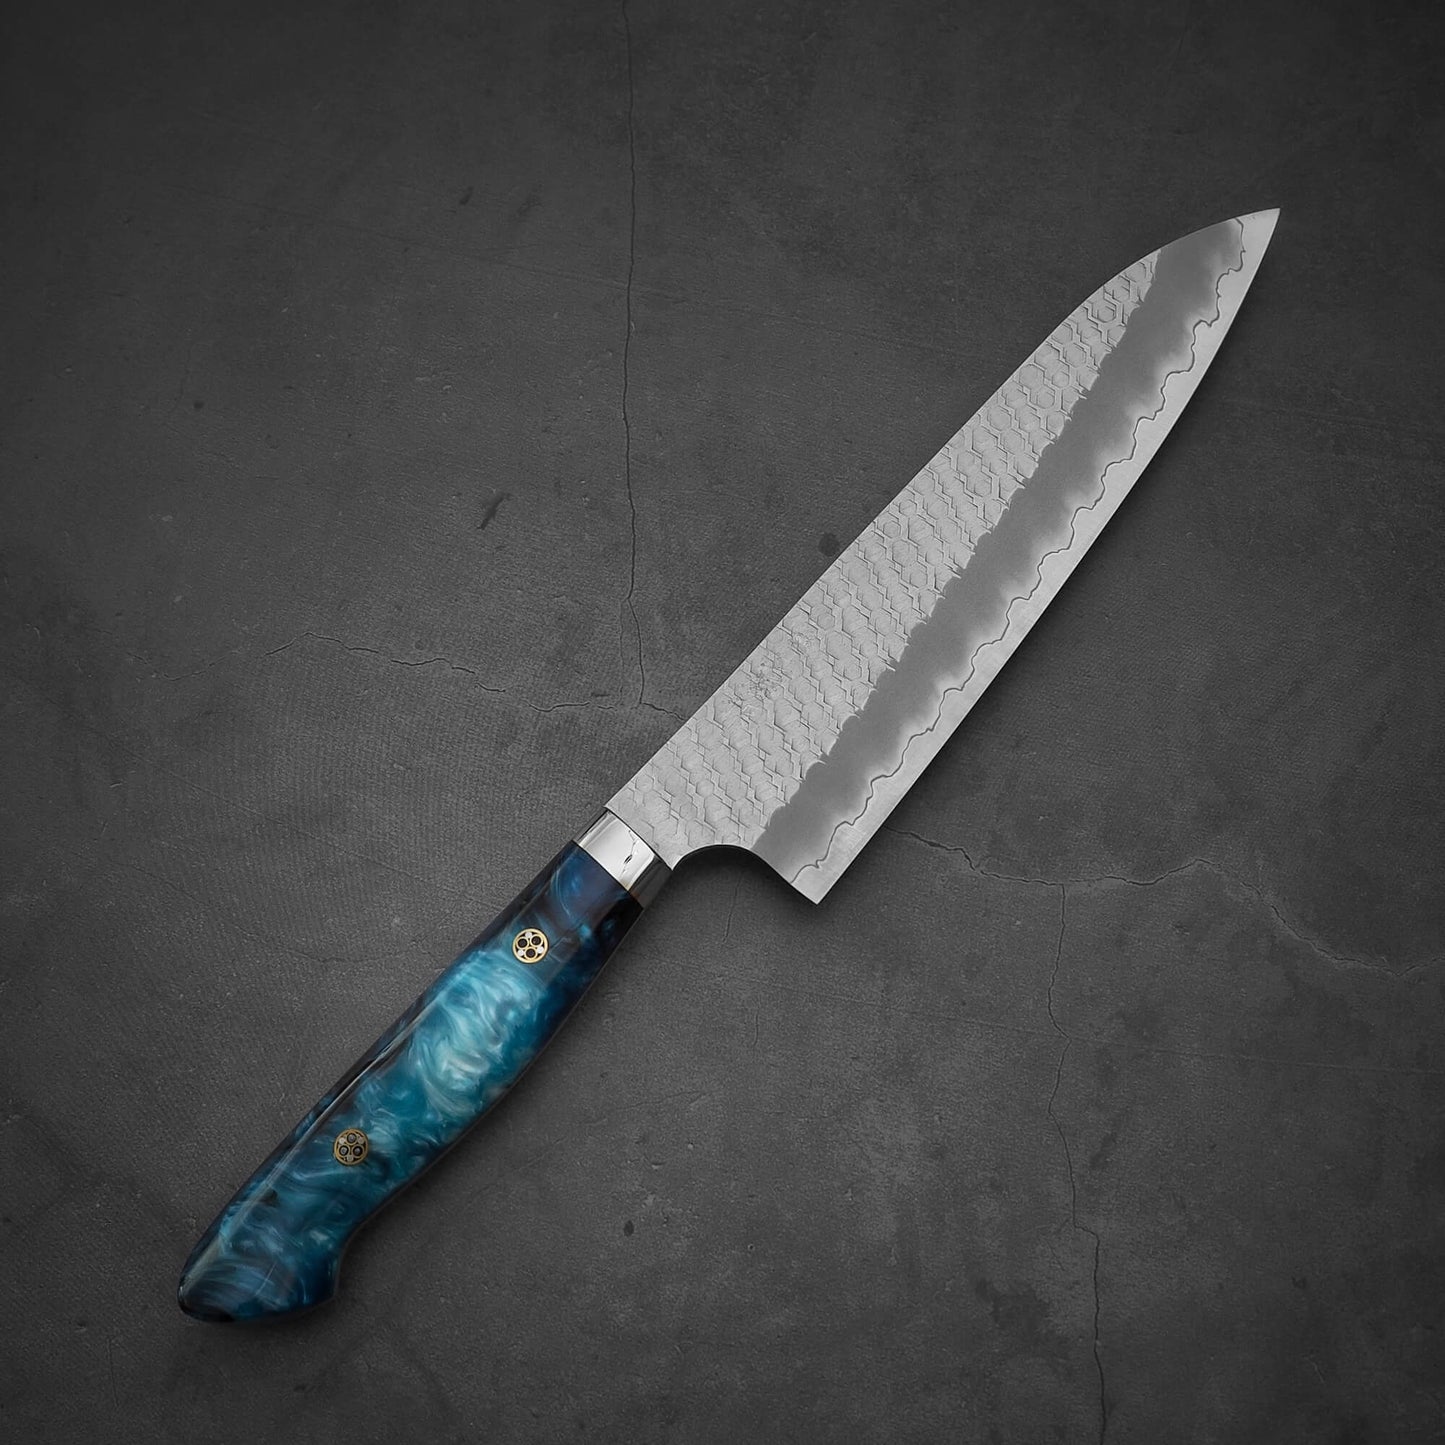 Top view of 210mm Nigara tsuchime SG2 gyuto knife with blue handle